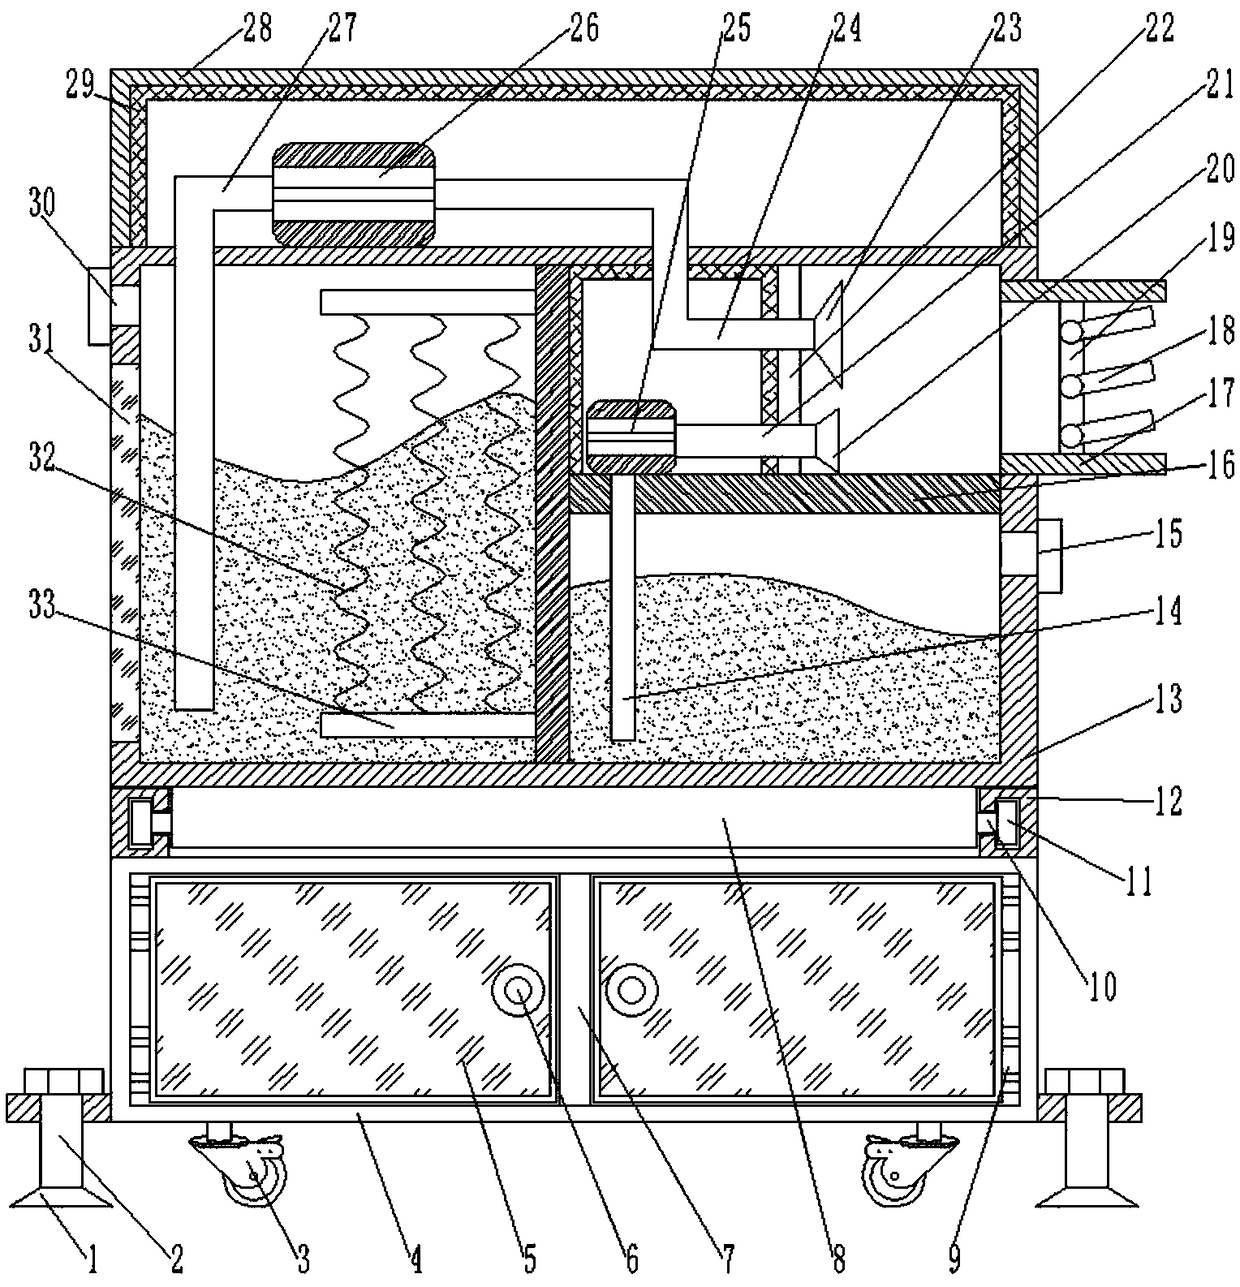 Humidification device facilitating adjusting humidity for research and development of biotechnology